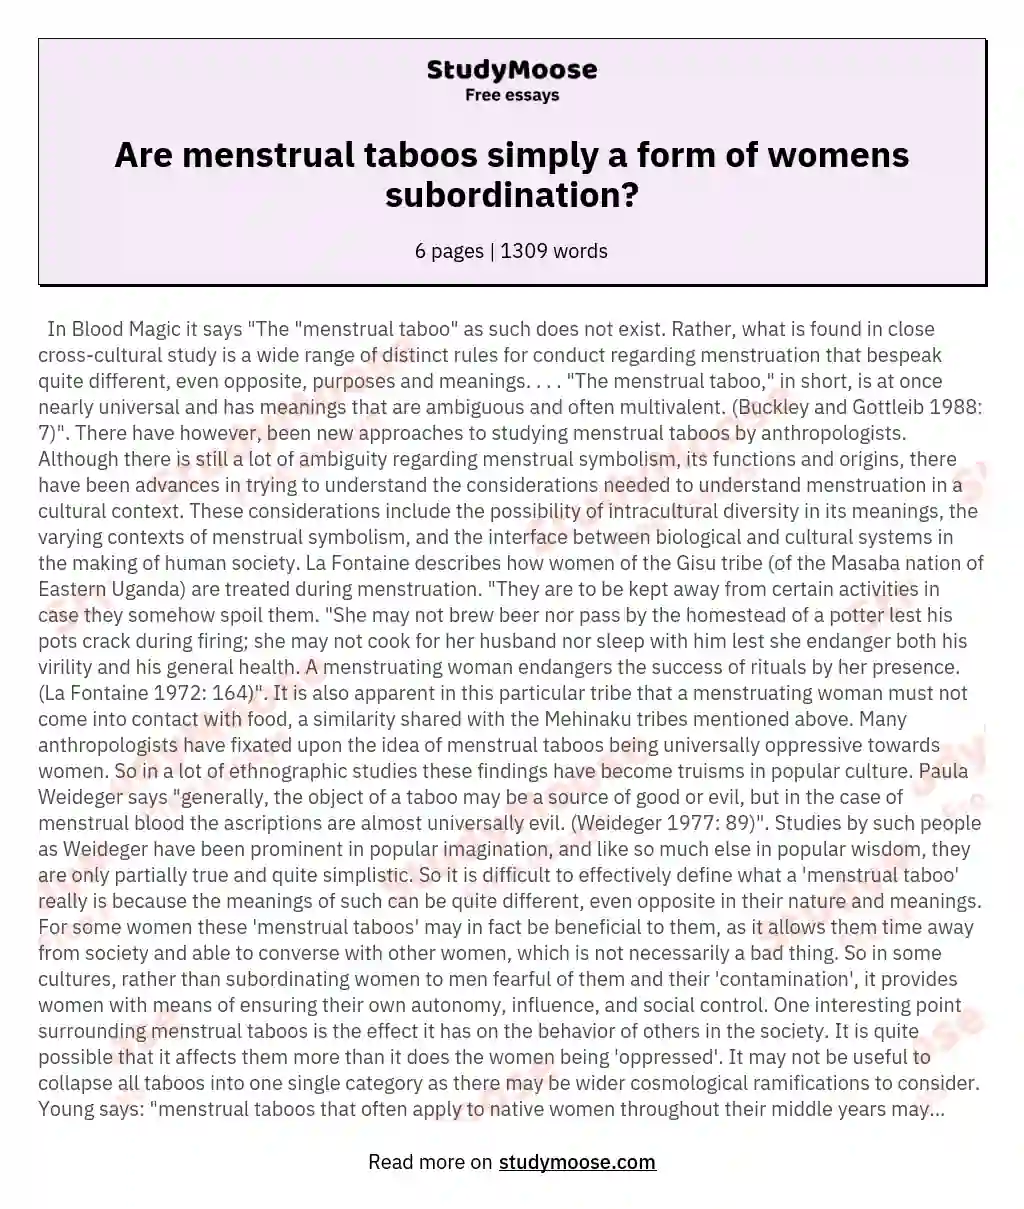 Are menstrual taboos simply a form of womens subordination? essay